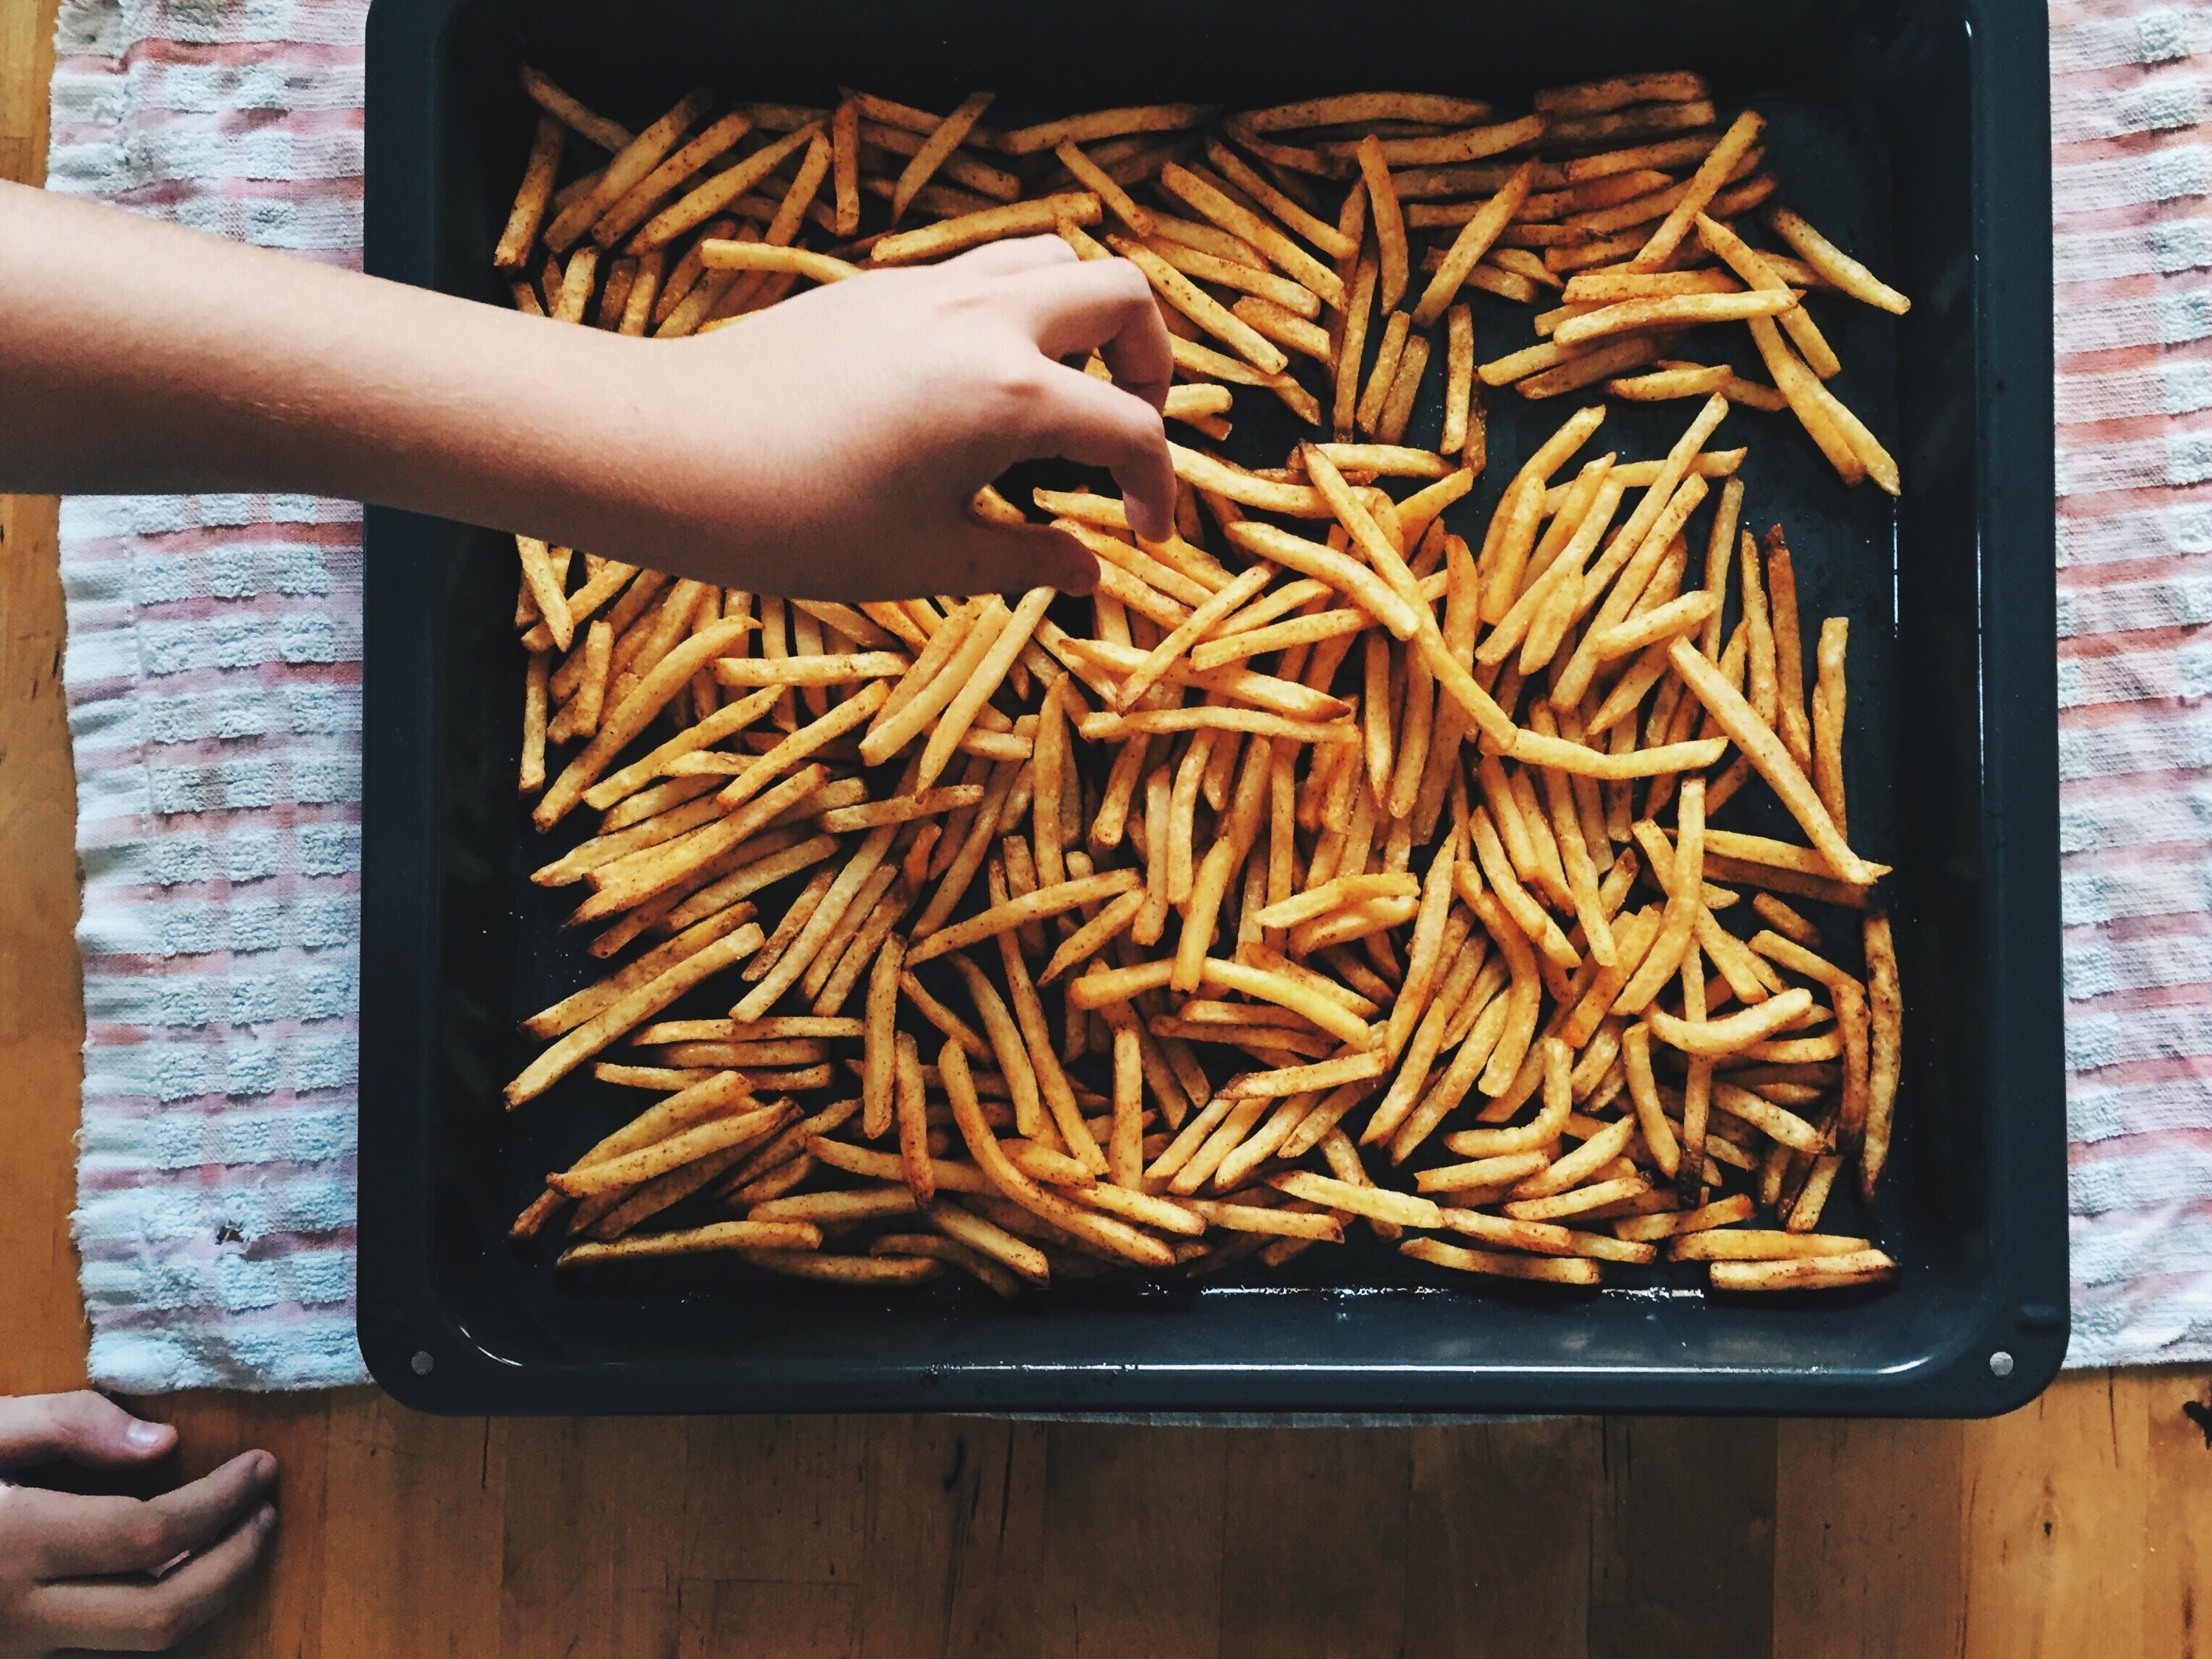 An overhead shot of fries in a baking tray and a hand taking out a fry.